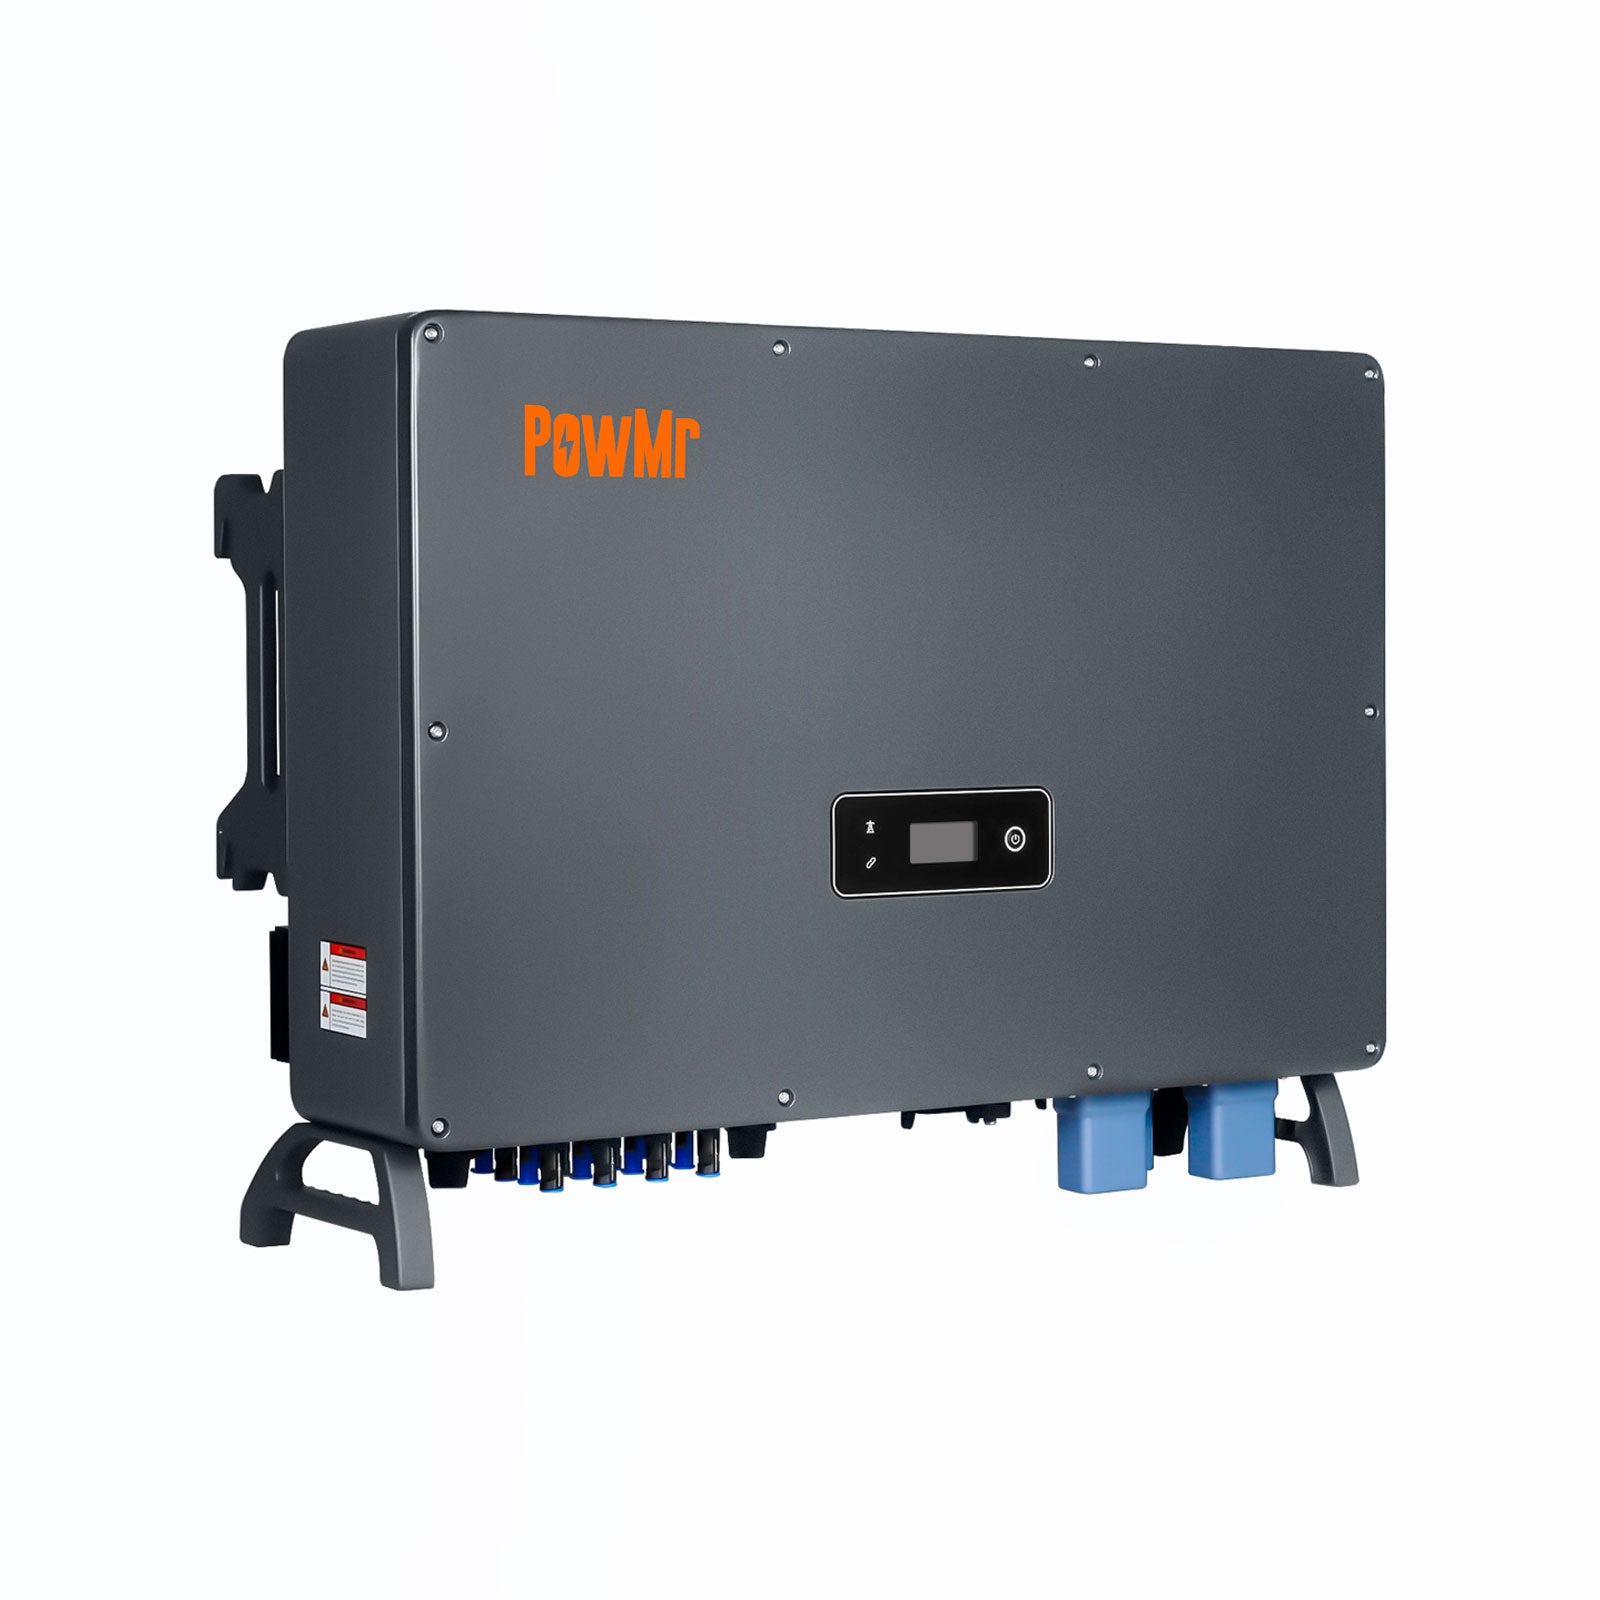 SOLXPOW X4 Series 50KW Three-Phase HV Battery 4 MPPTs Commercial Storage Inverter